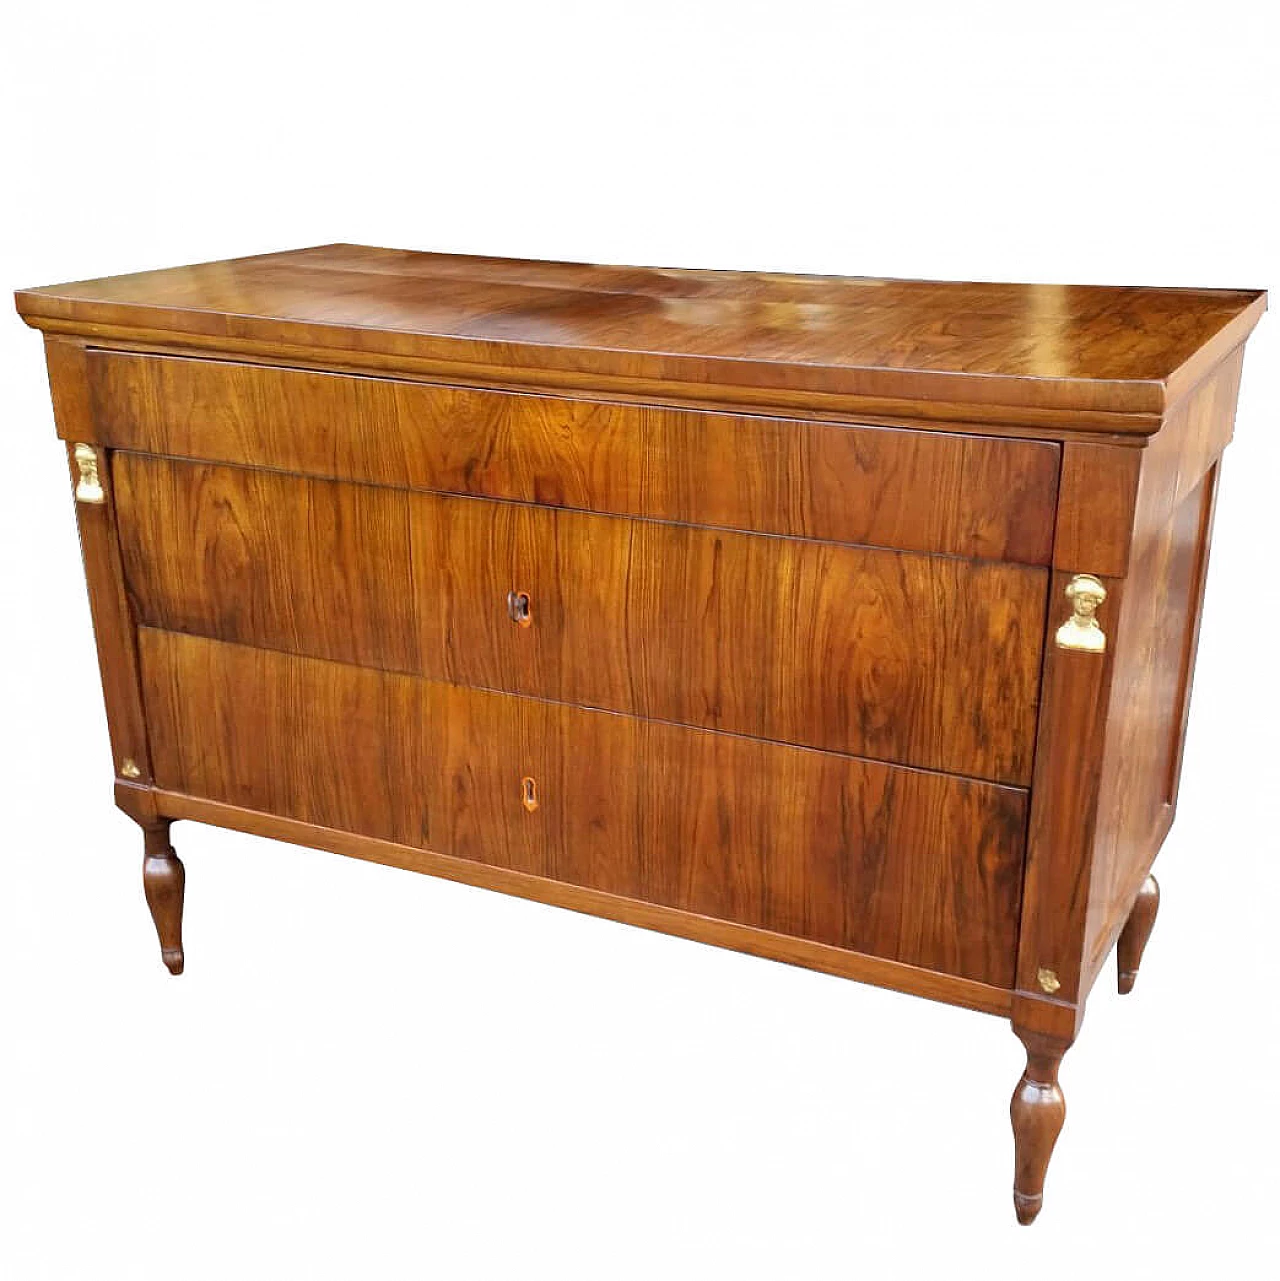 Direttorio chest of drawers in walnut, late 18th century 1246285